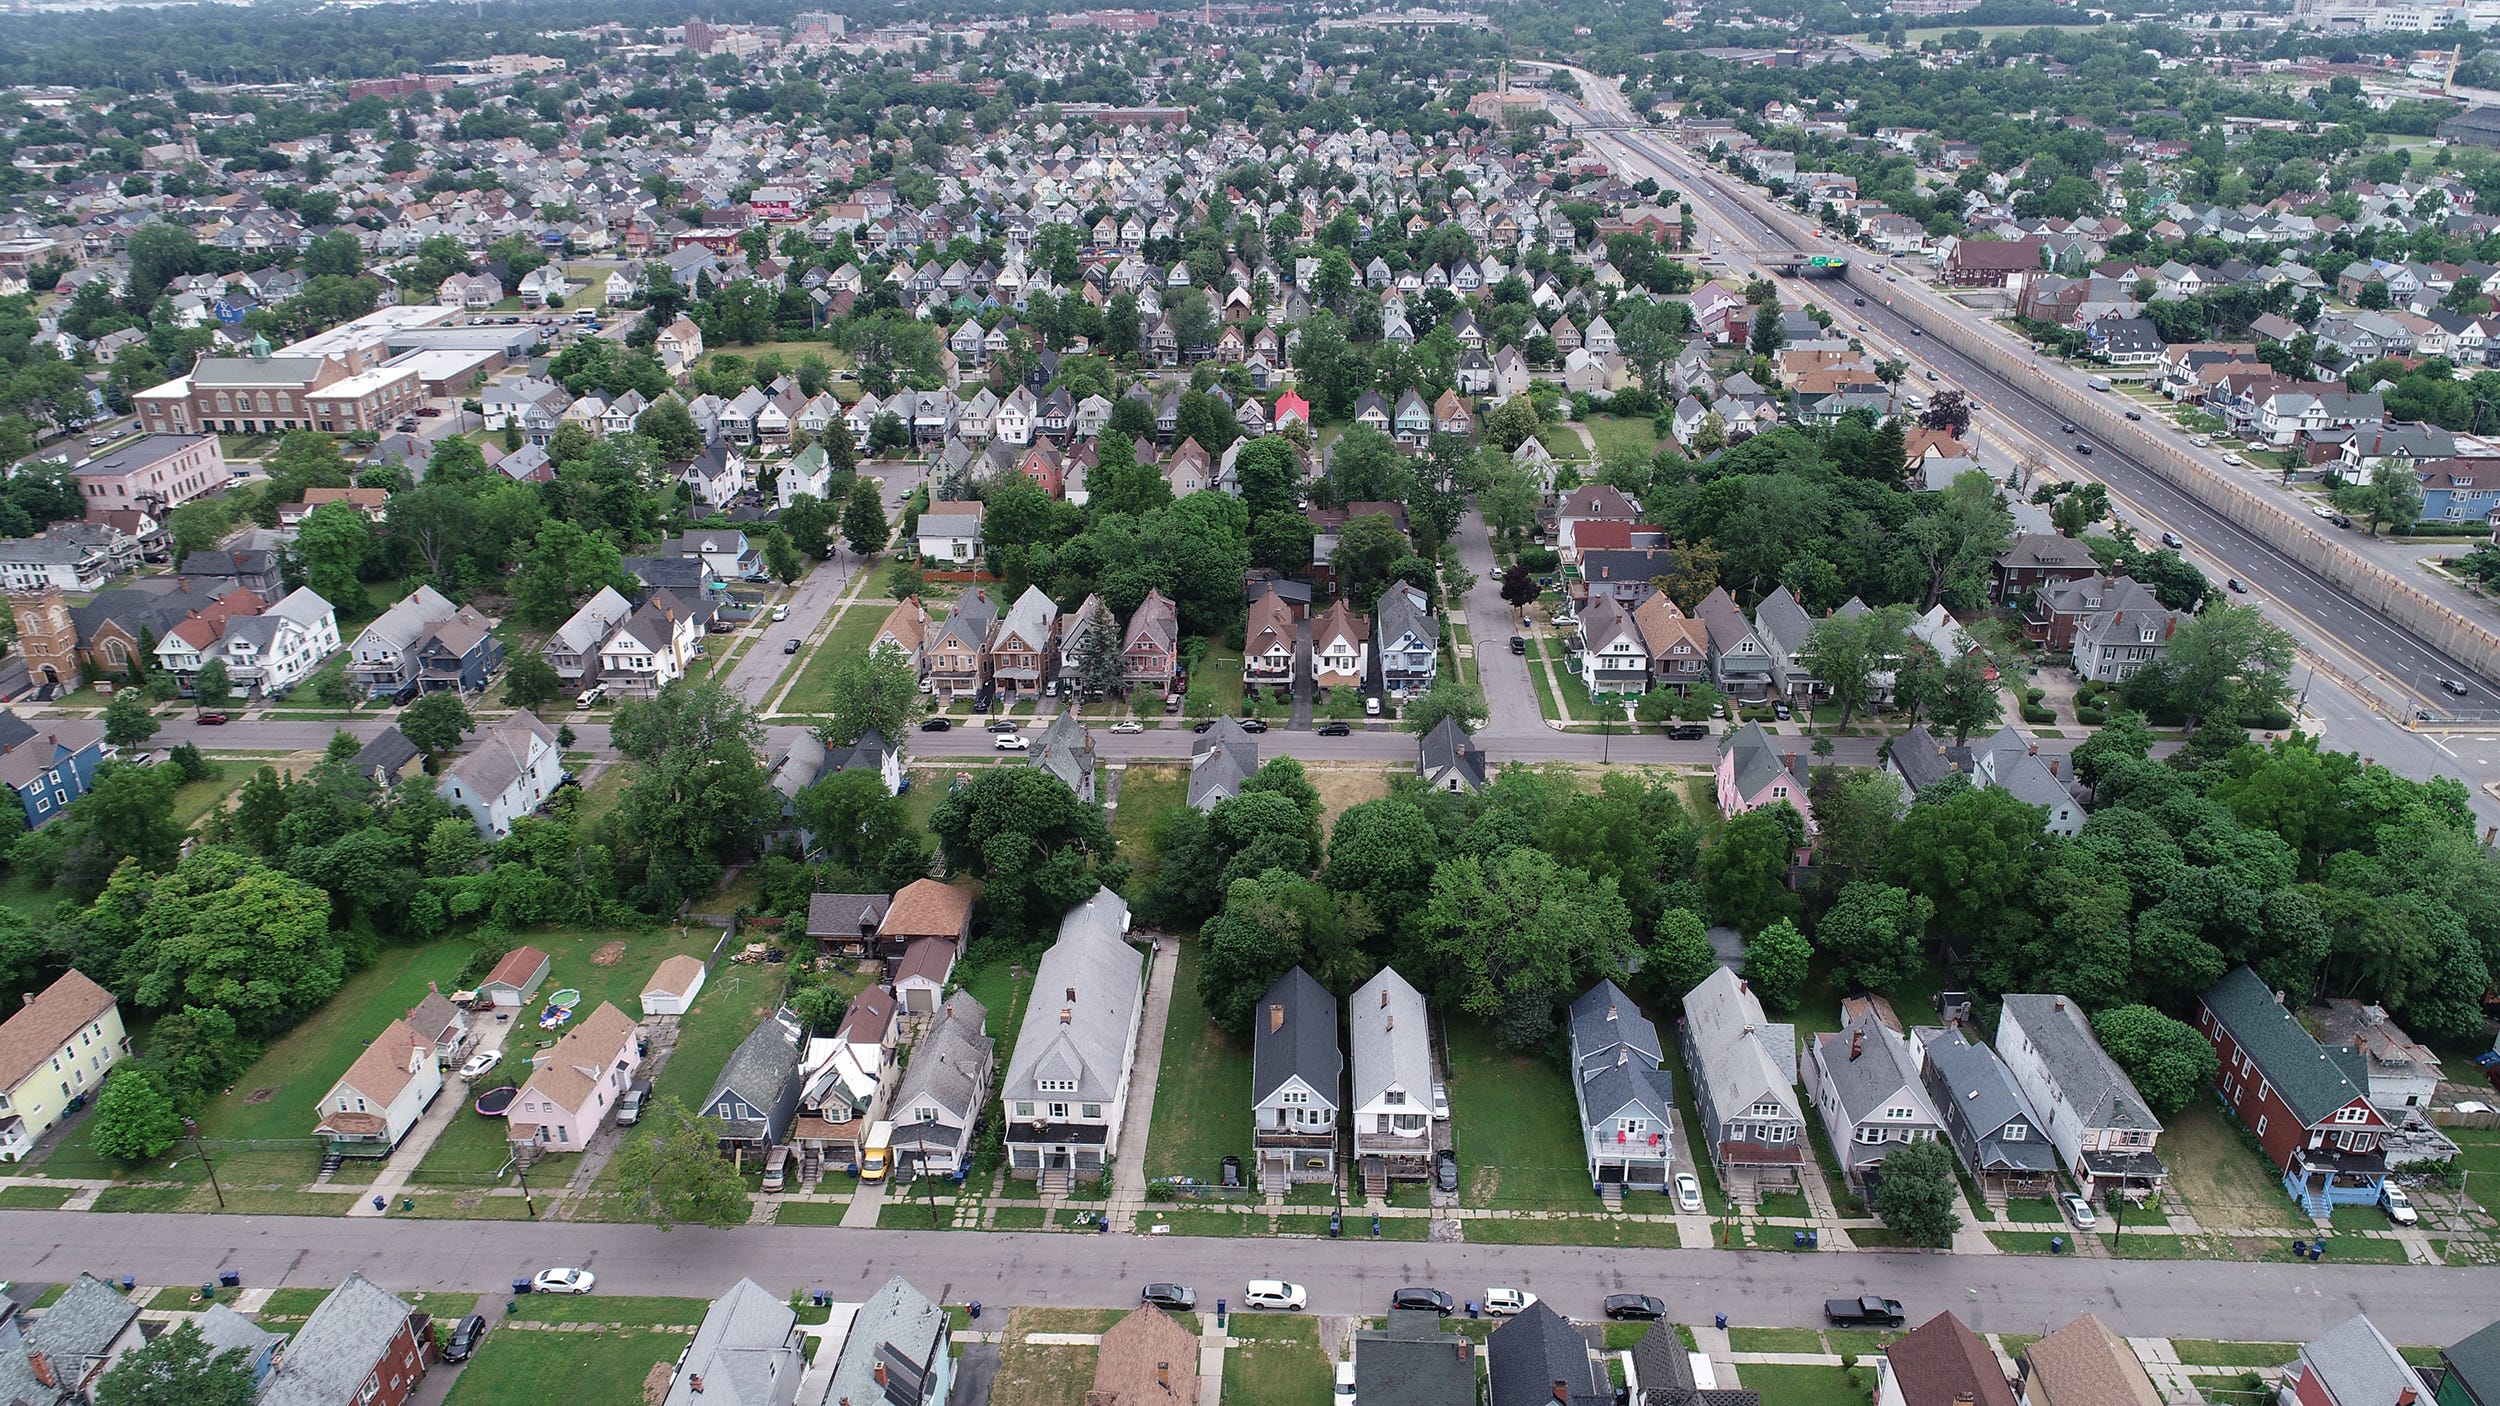 Aerial views of the neighborhoods on July 7, 2022, on the East Side of Buffalo, N.Y, that were separated by the Kensington Expressway. The Kensington Expressway was built decades ago.